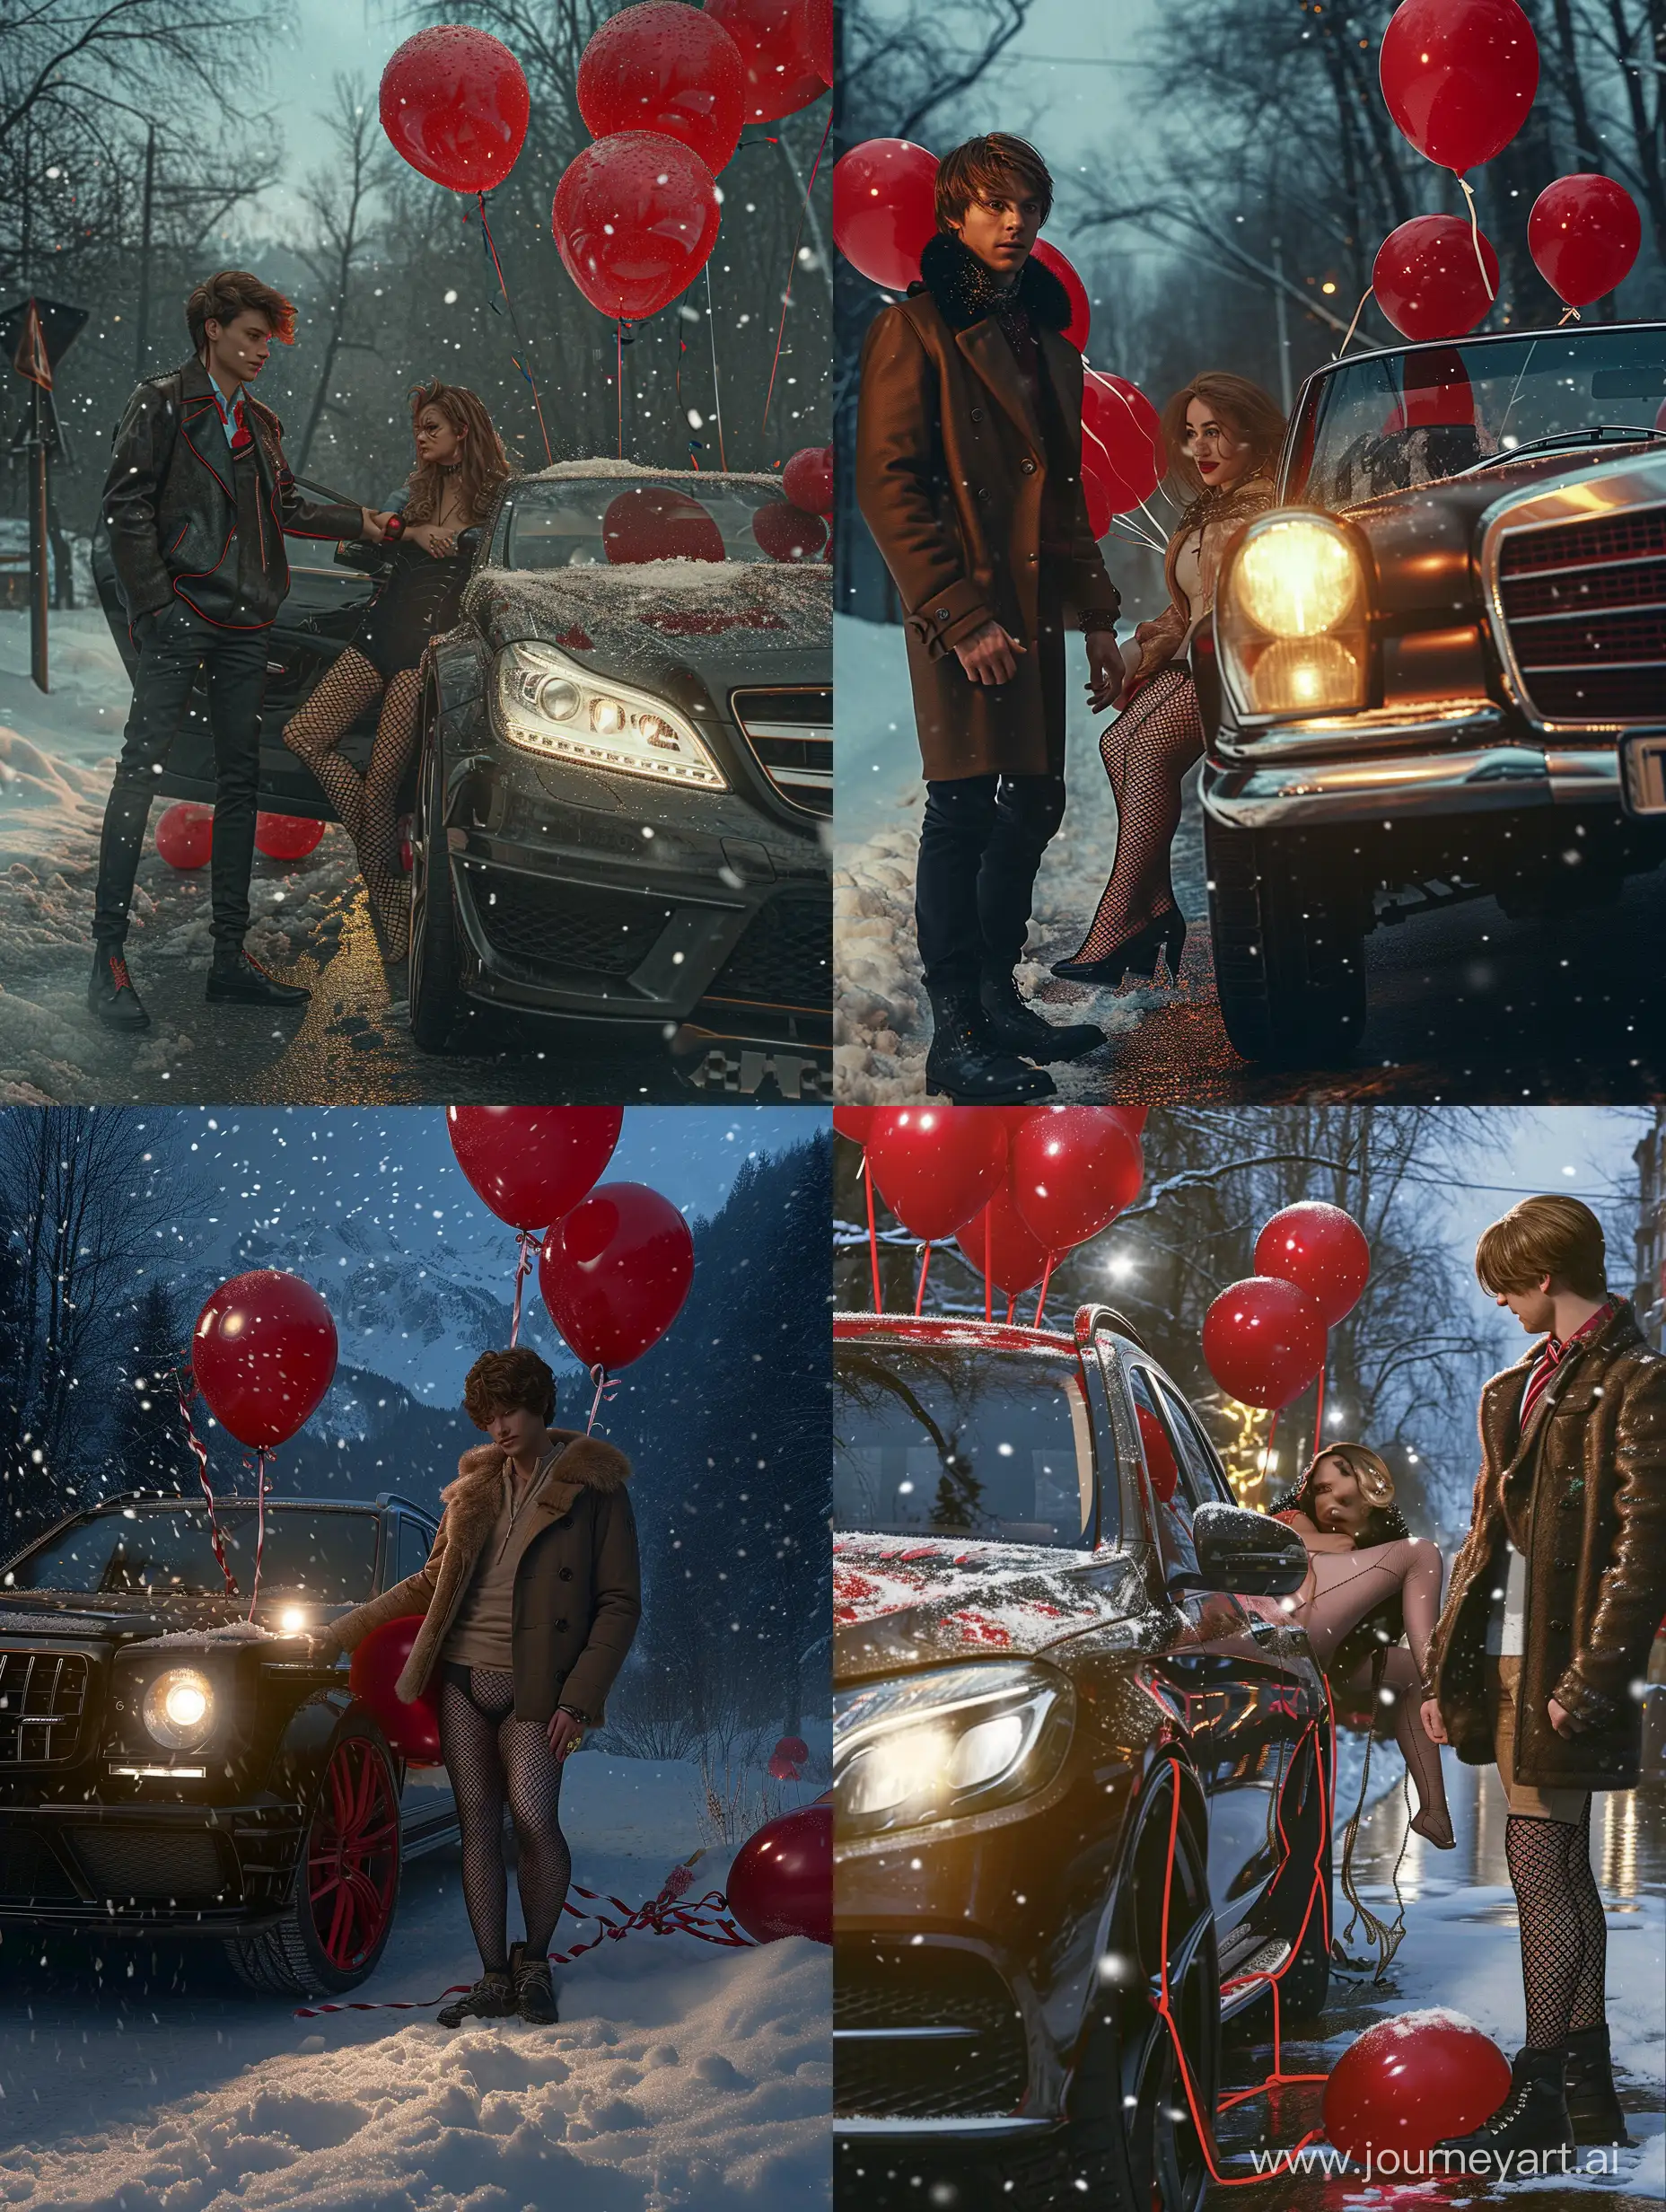 Stylish-Man-and-Luxury-Car-with-Red-Balloons